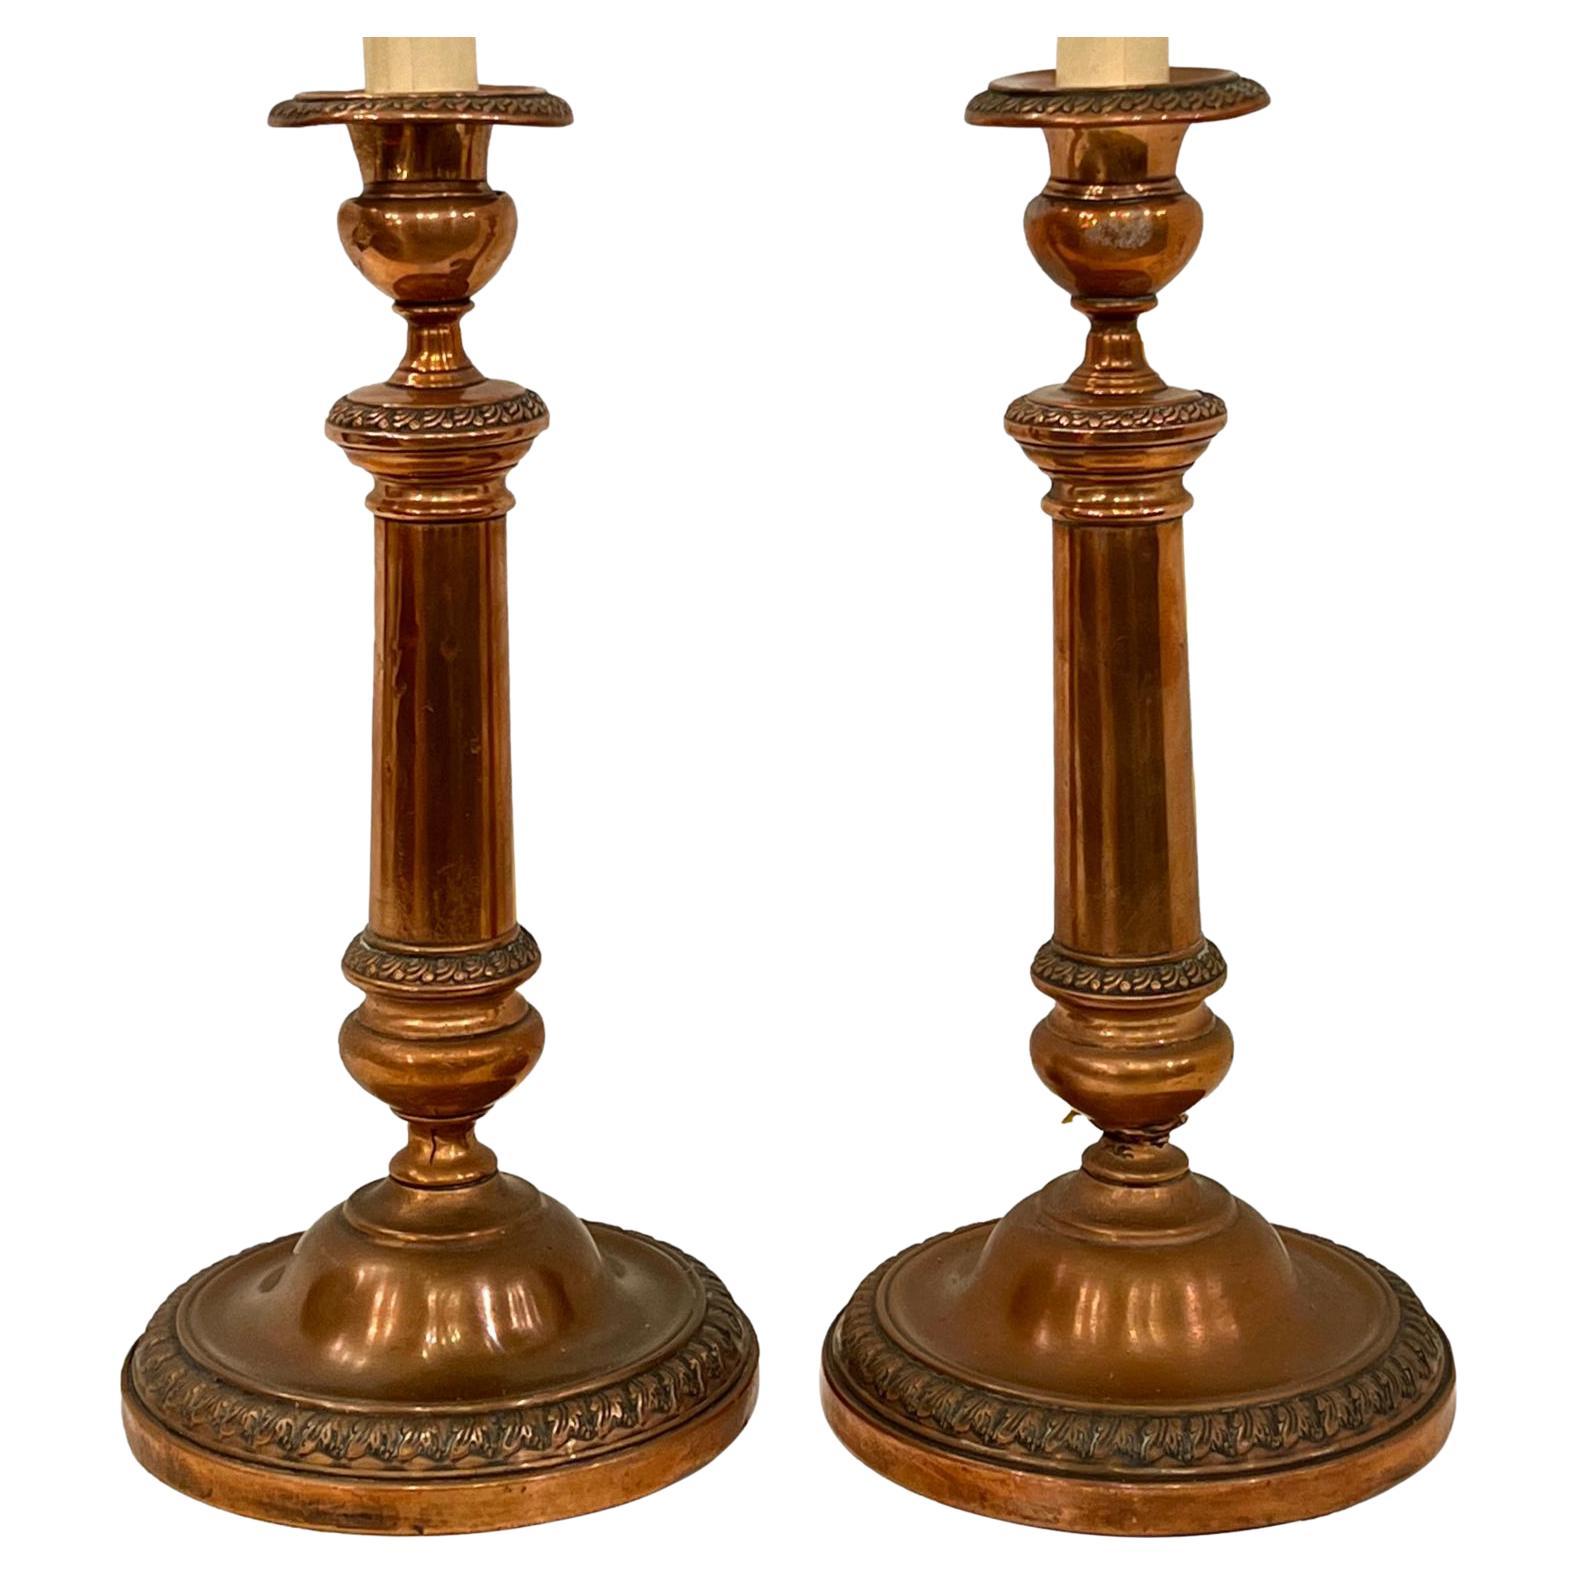 Pair of Antique Electrified Copper Candlestick Lamps